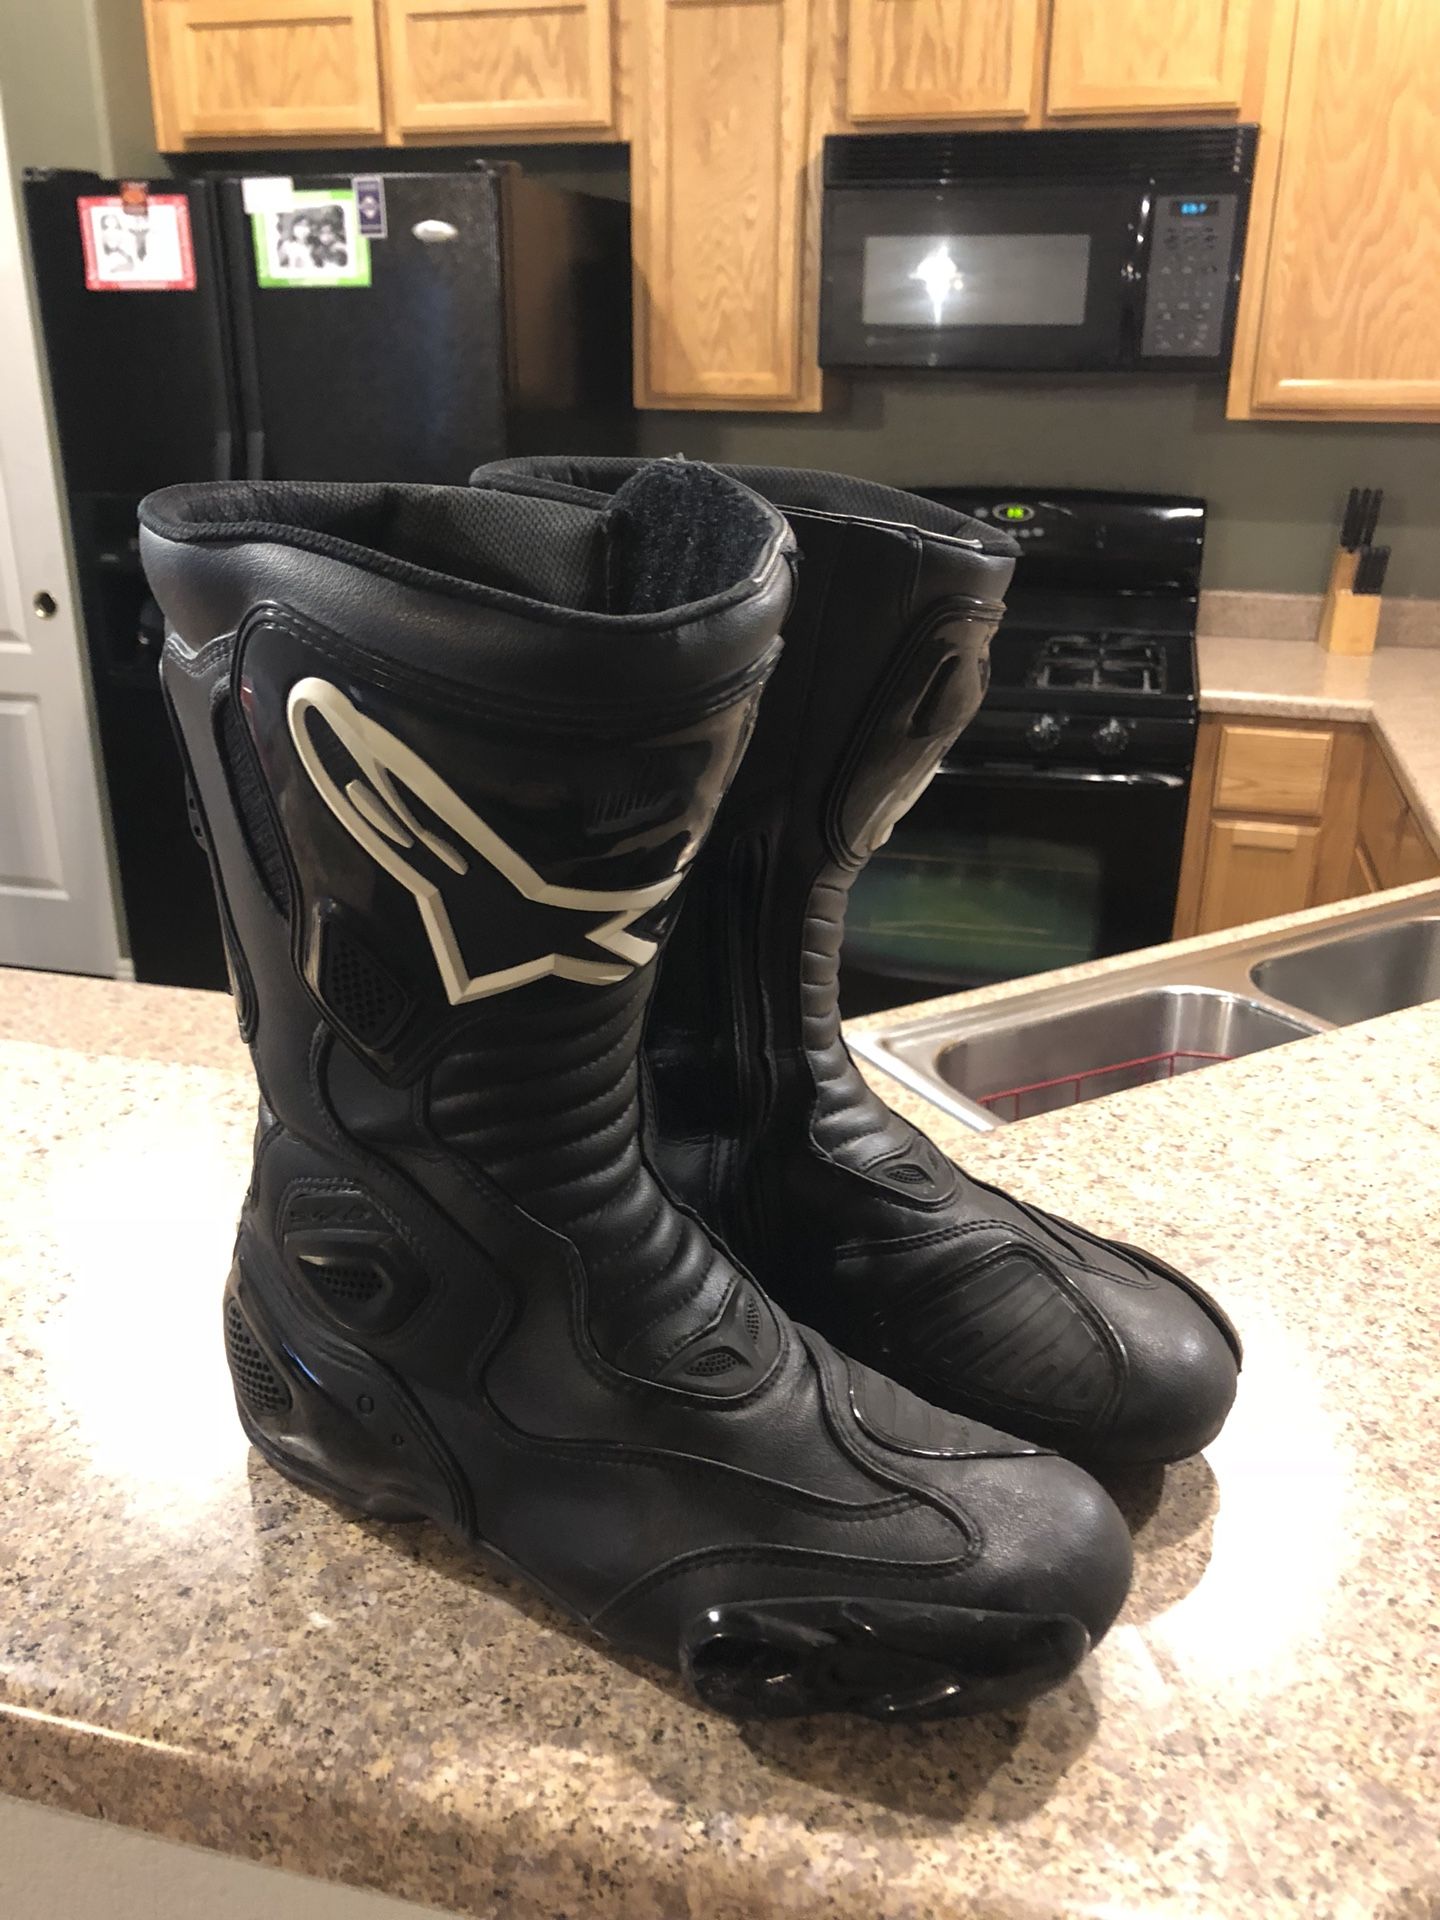 Motorcycle gear make offer on all seen